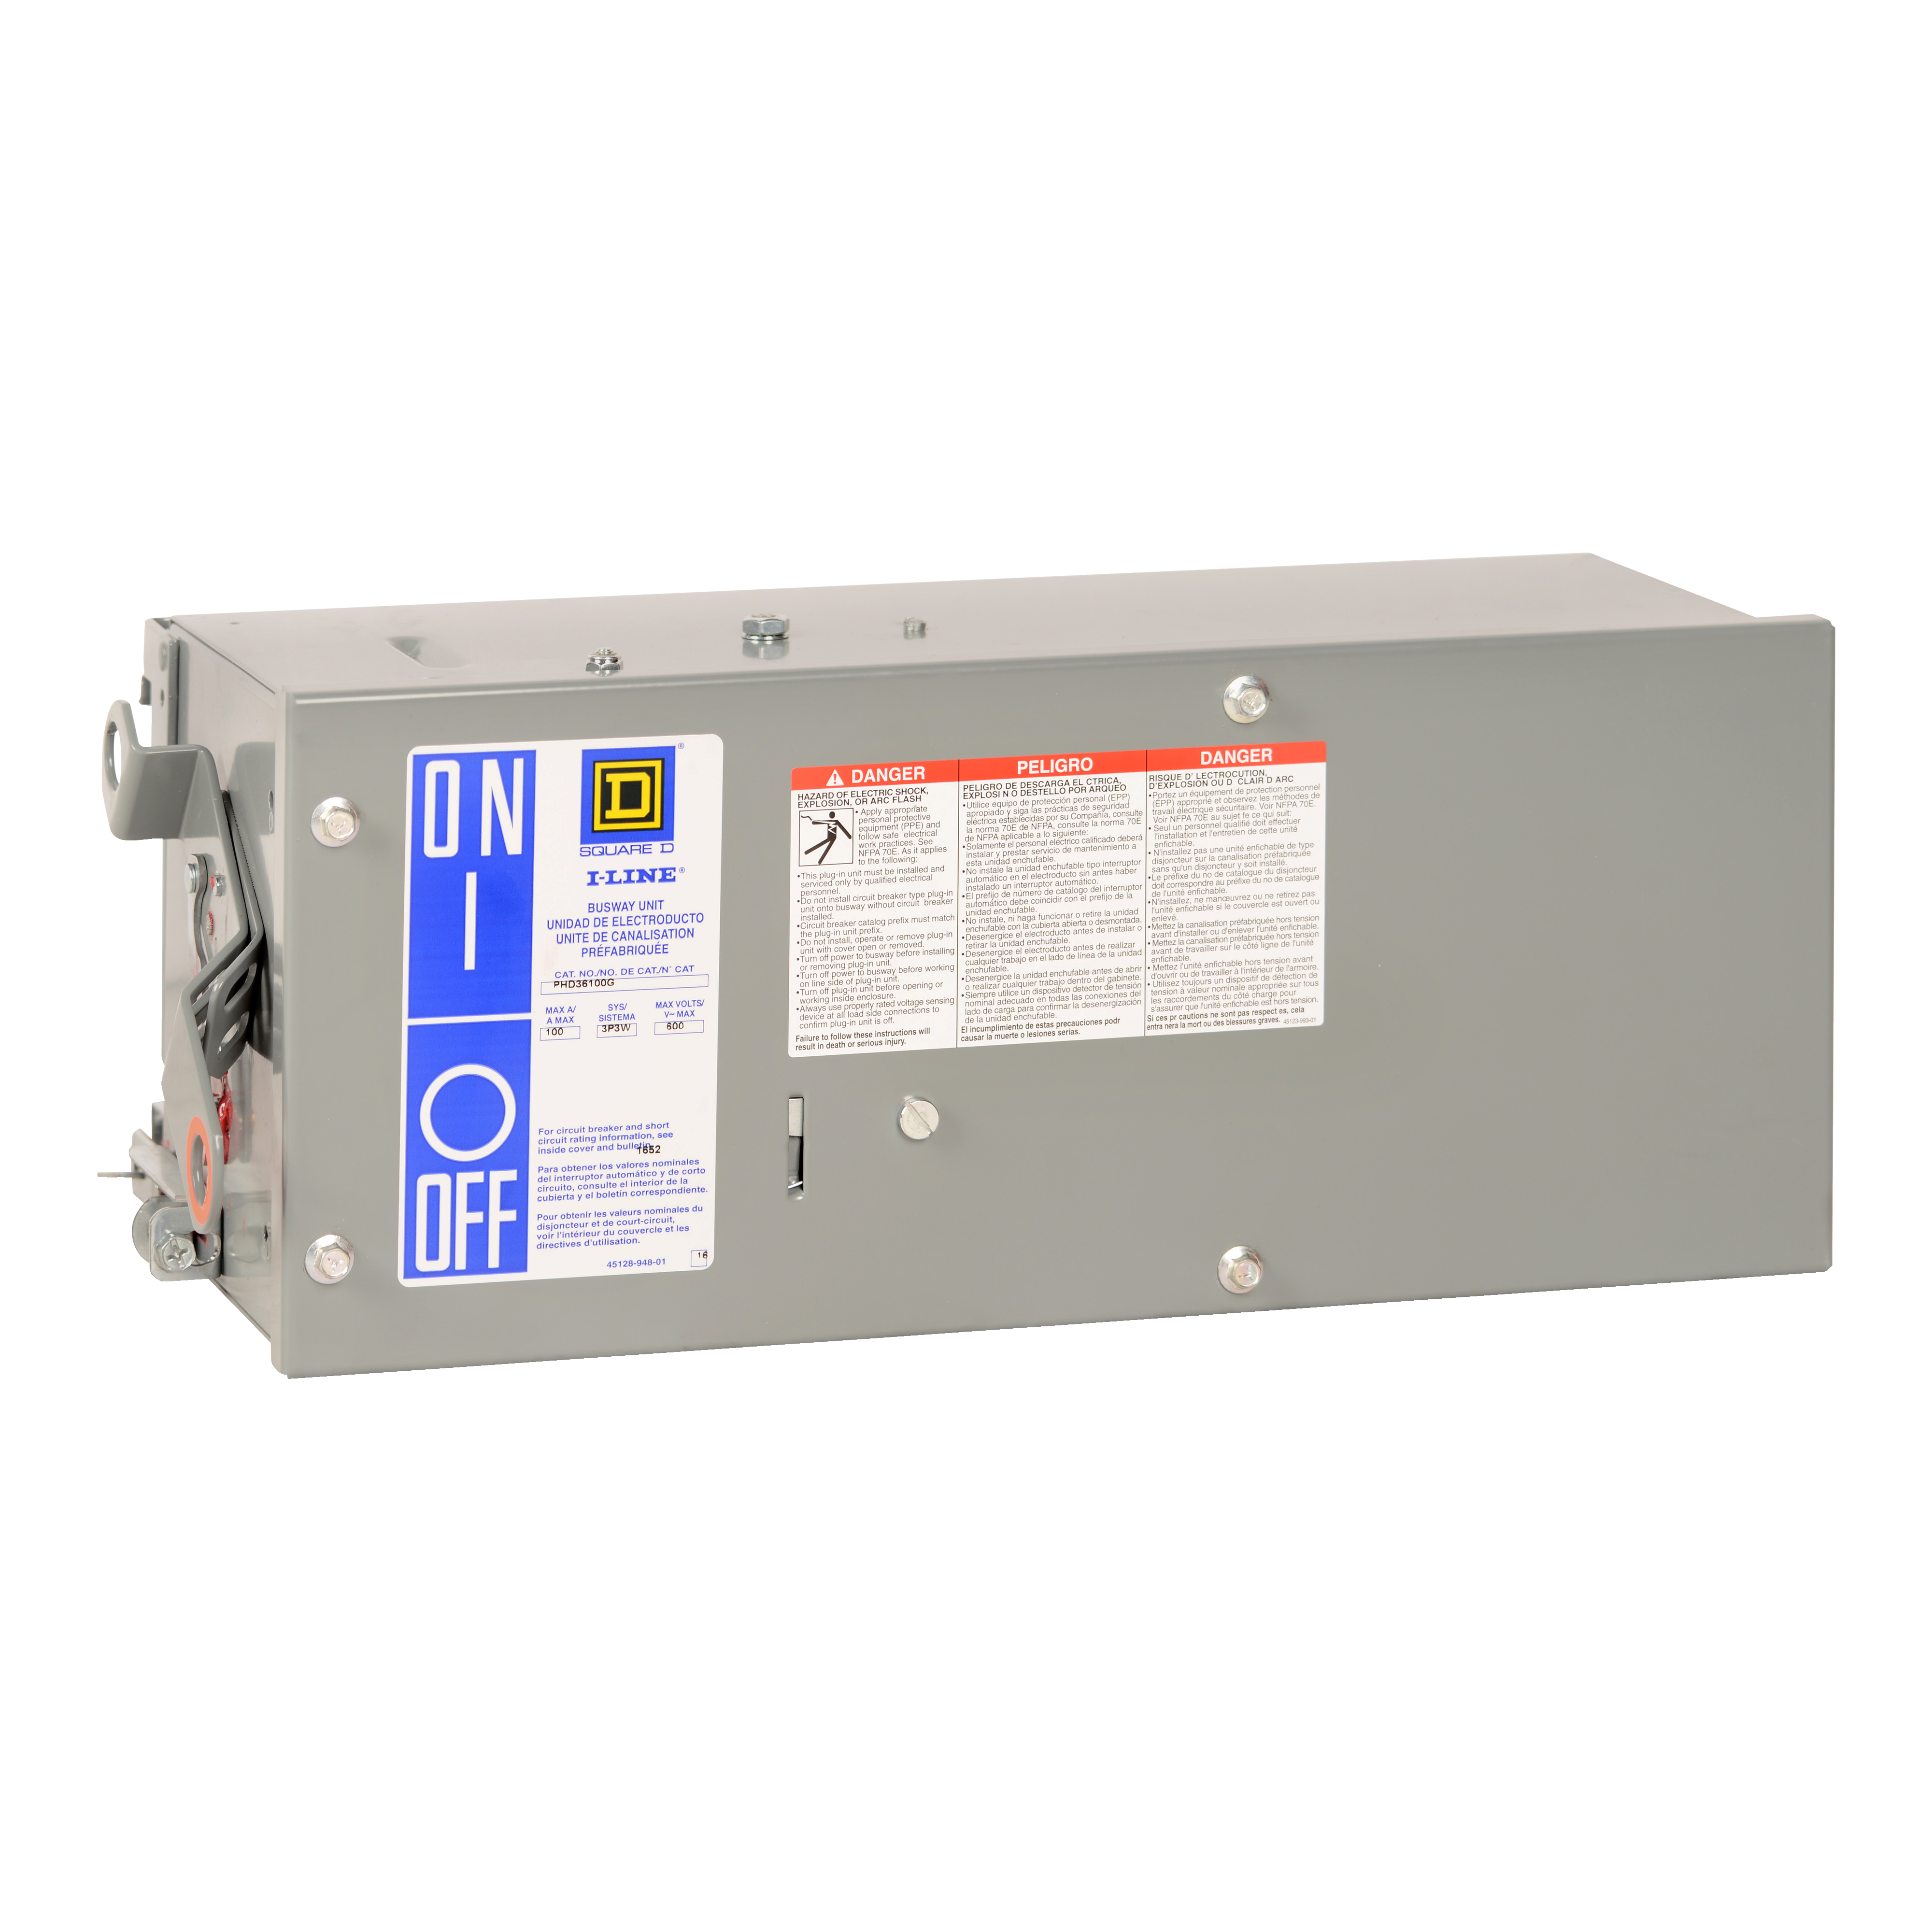 Plug-in unit, I-Line Busway, H-frame, 60A, 3 phase, 3 wire, 600VAC, 14kA, ground